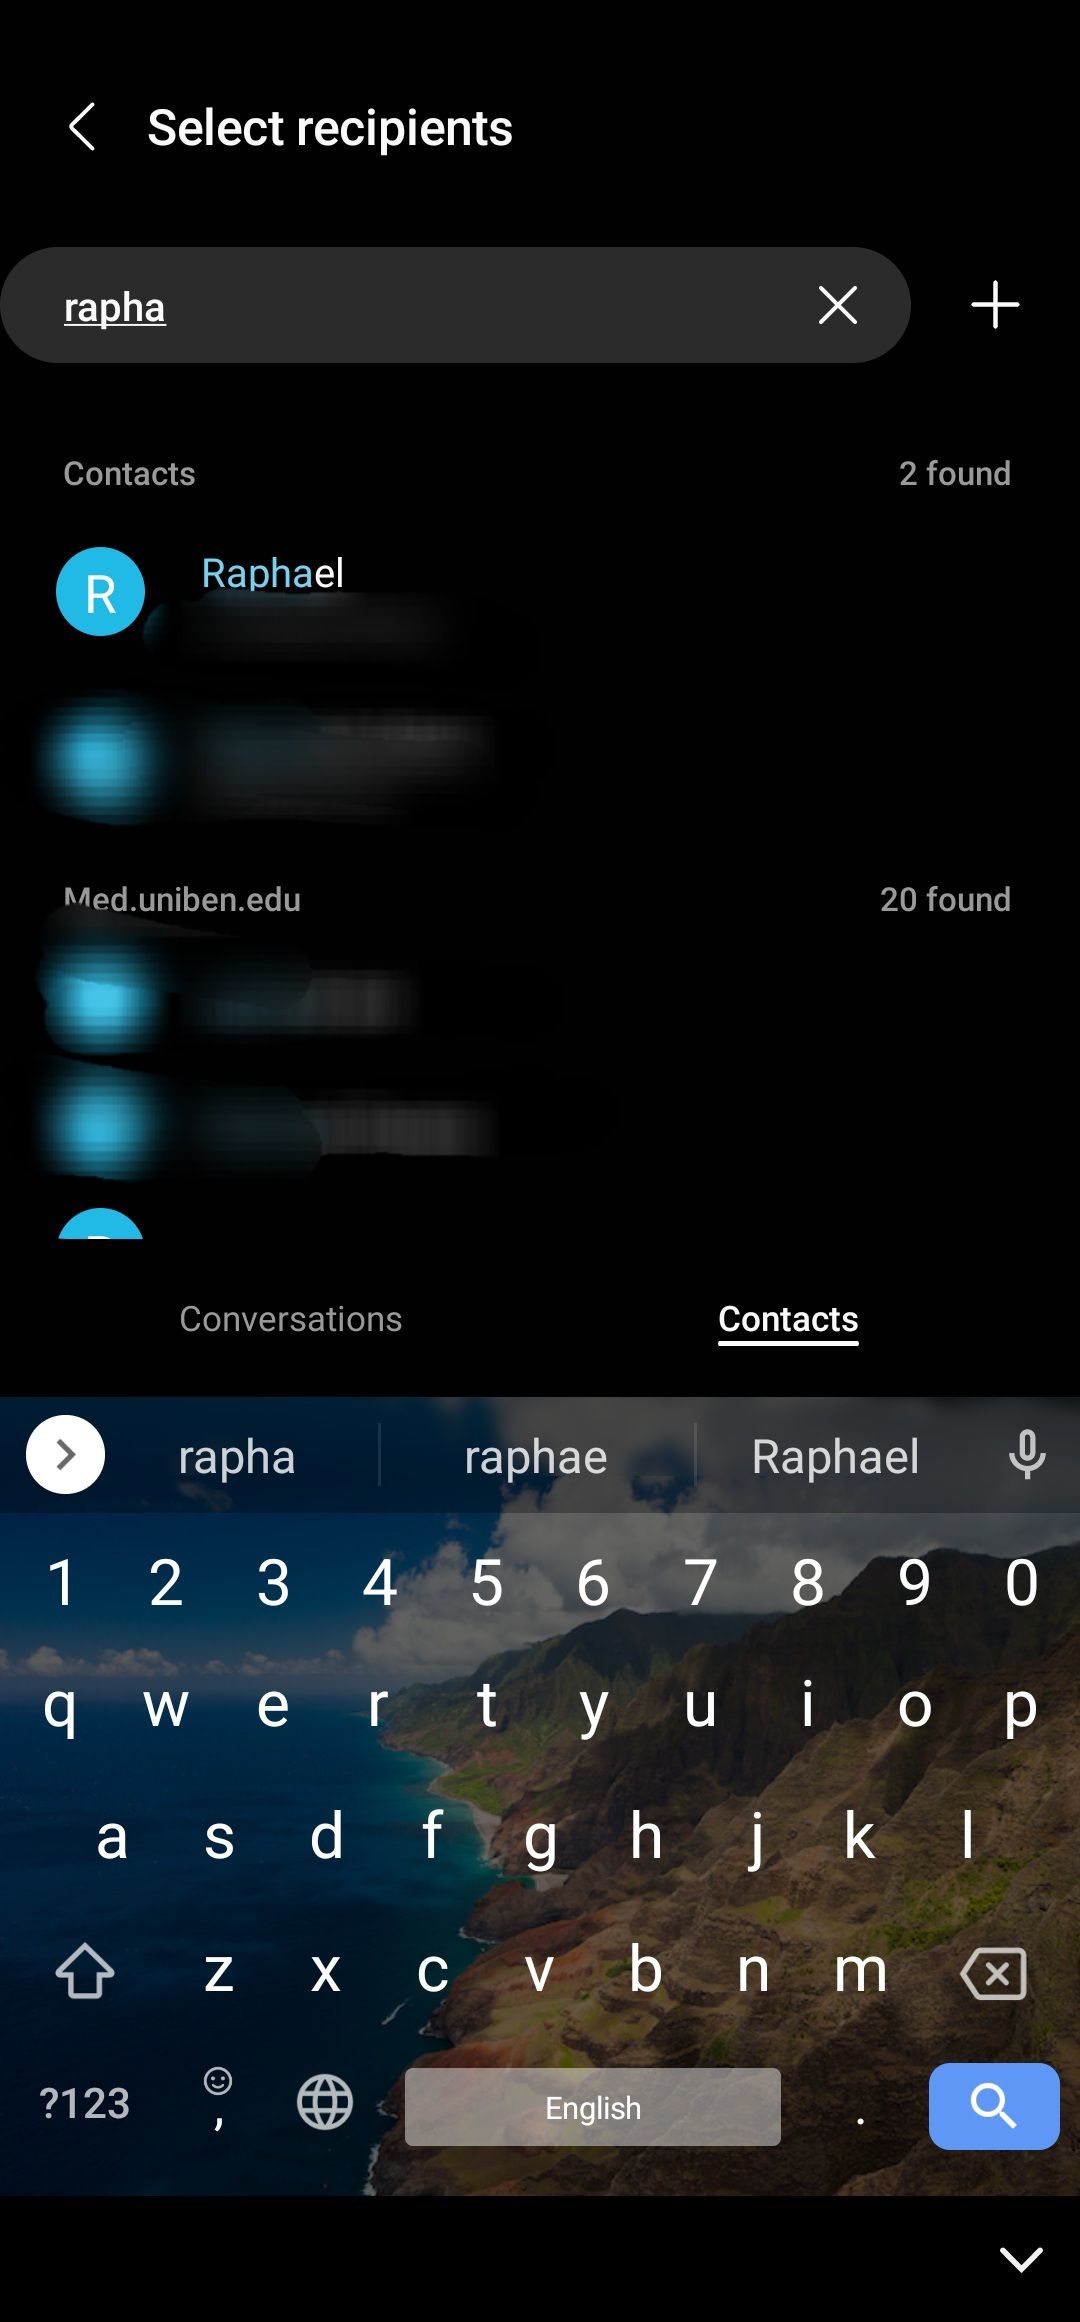 Select a contact you want to forward the text to.